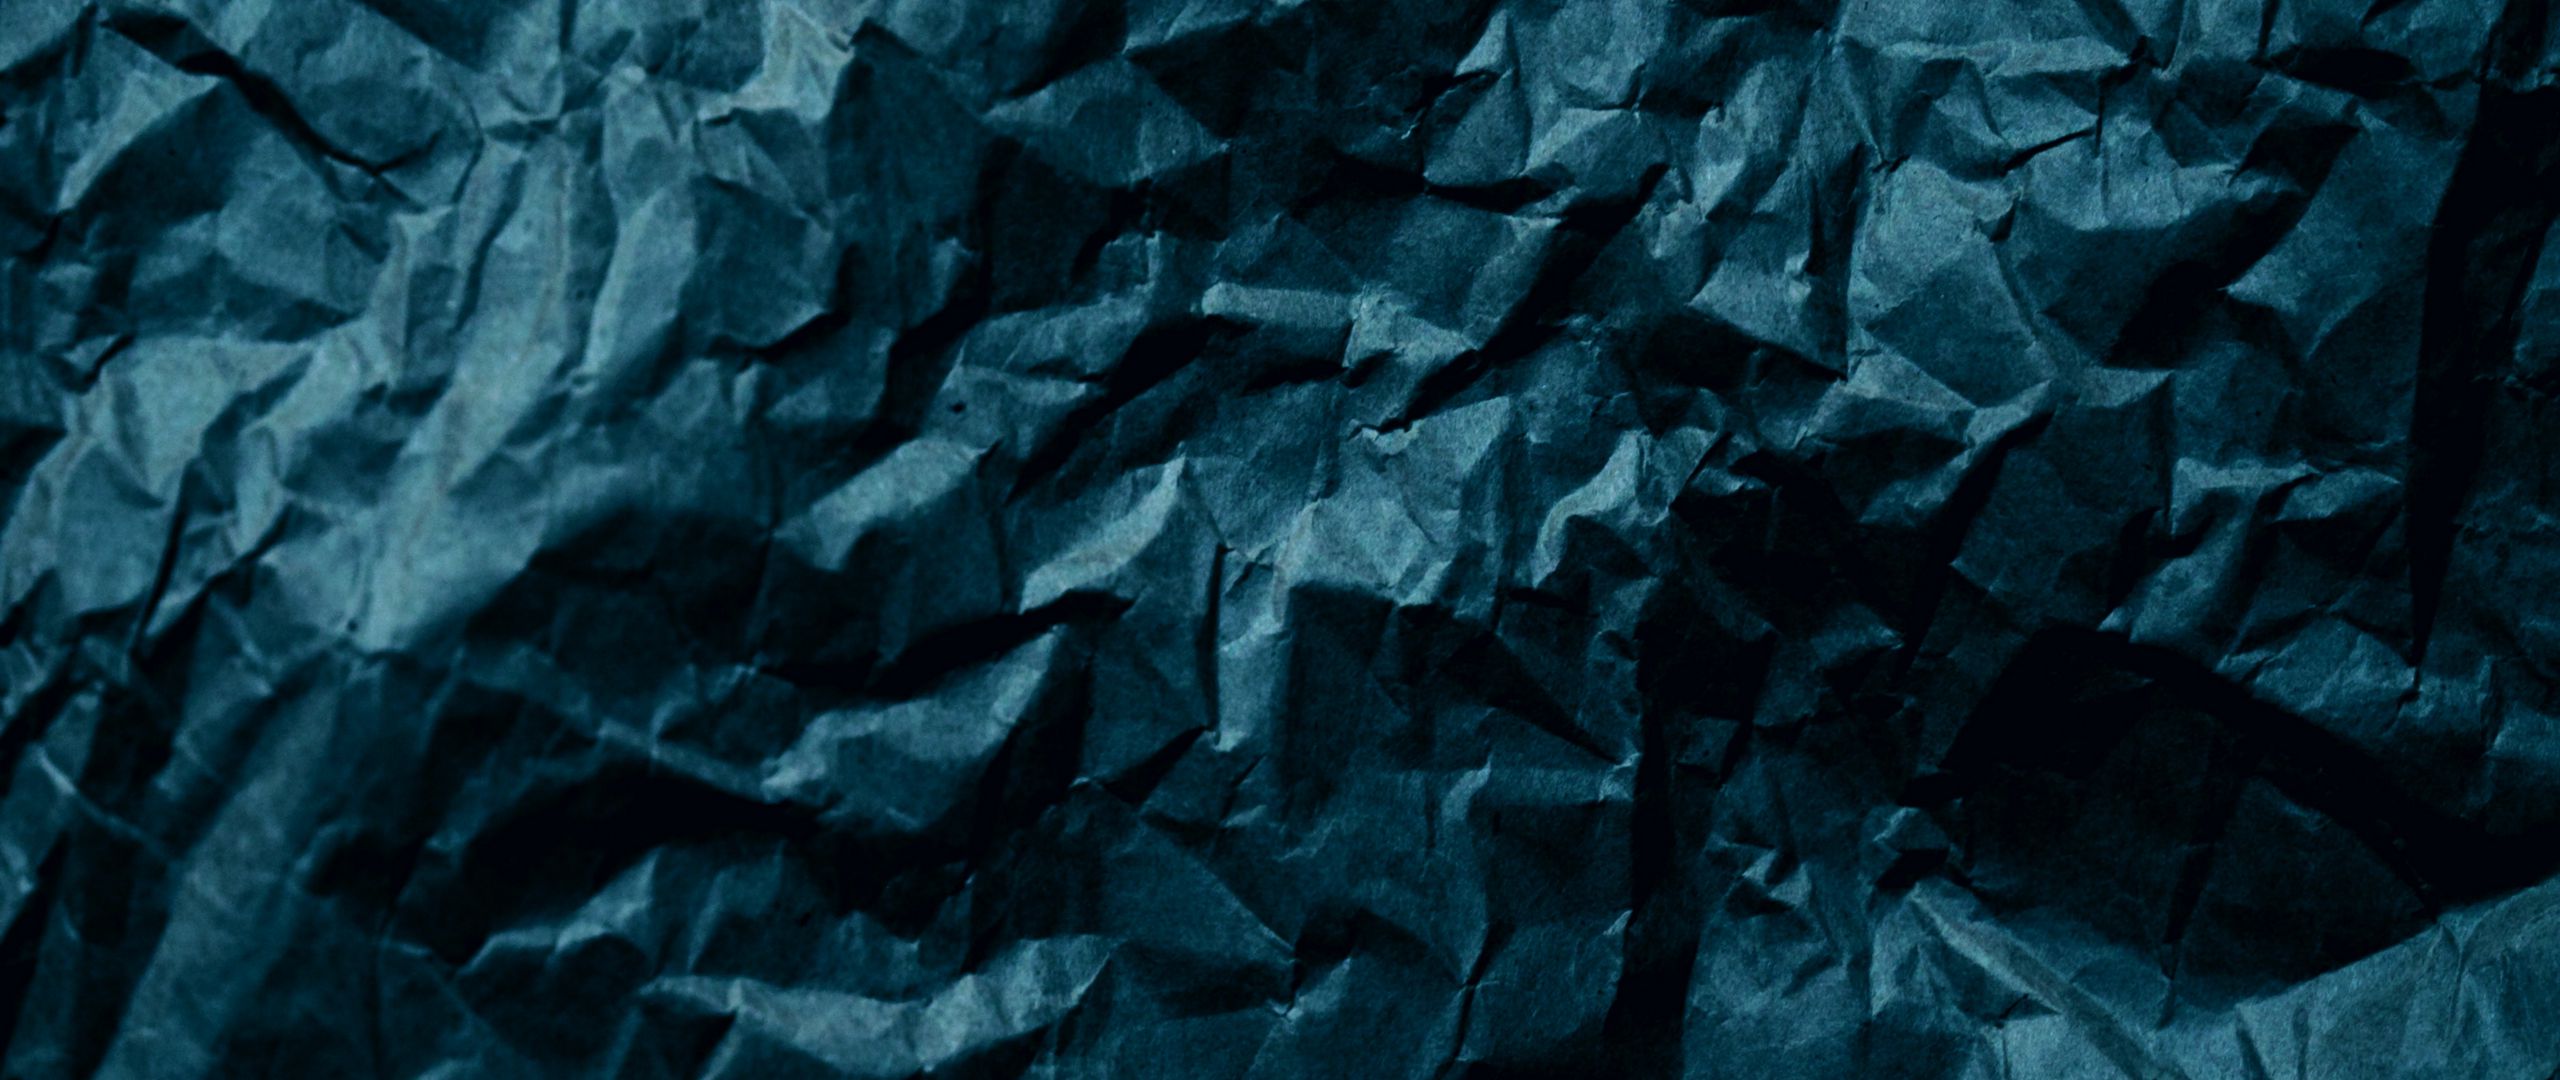 Download wallpaper 2560x1080 paper, texture, crumpled, surface dual ...